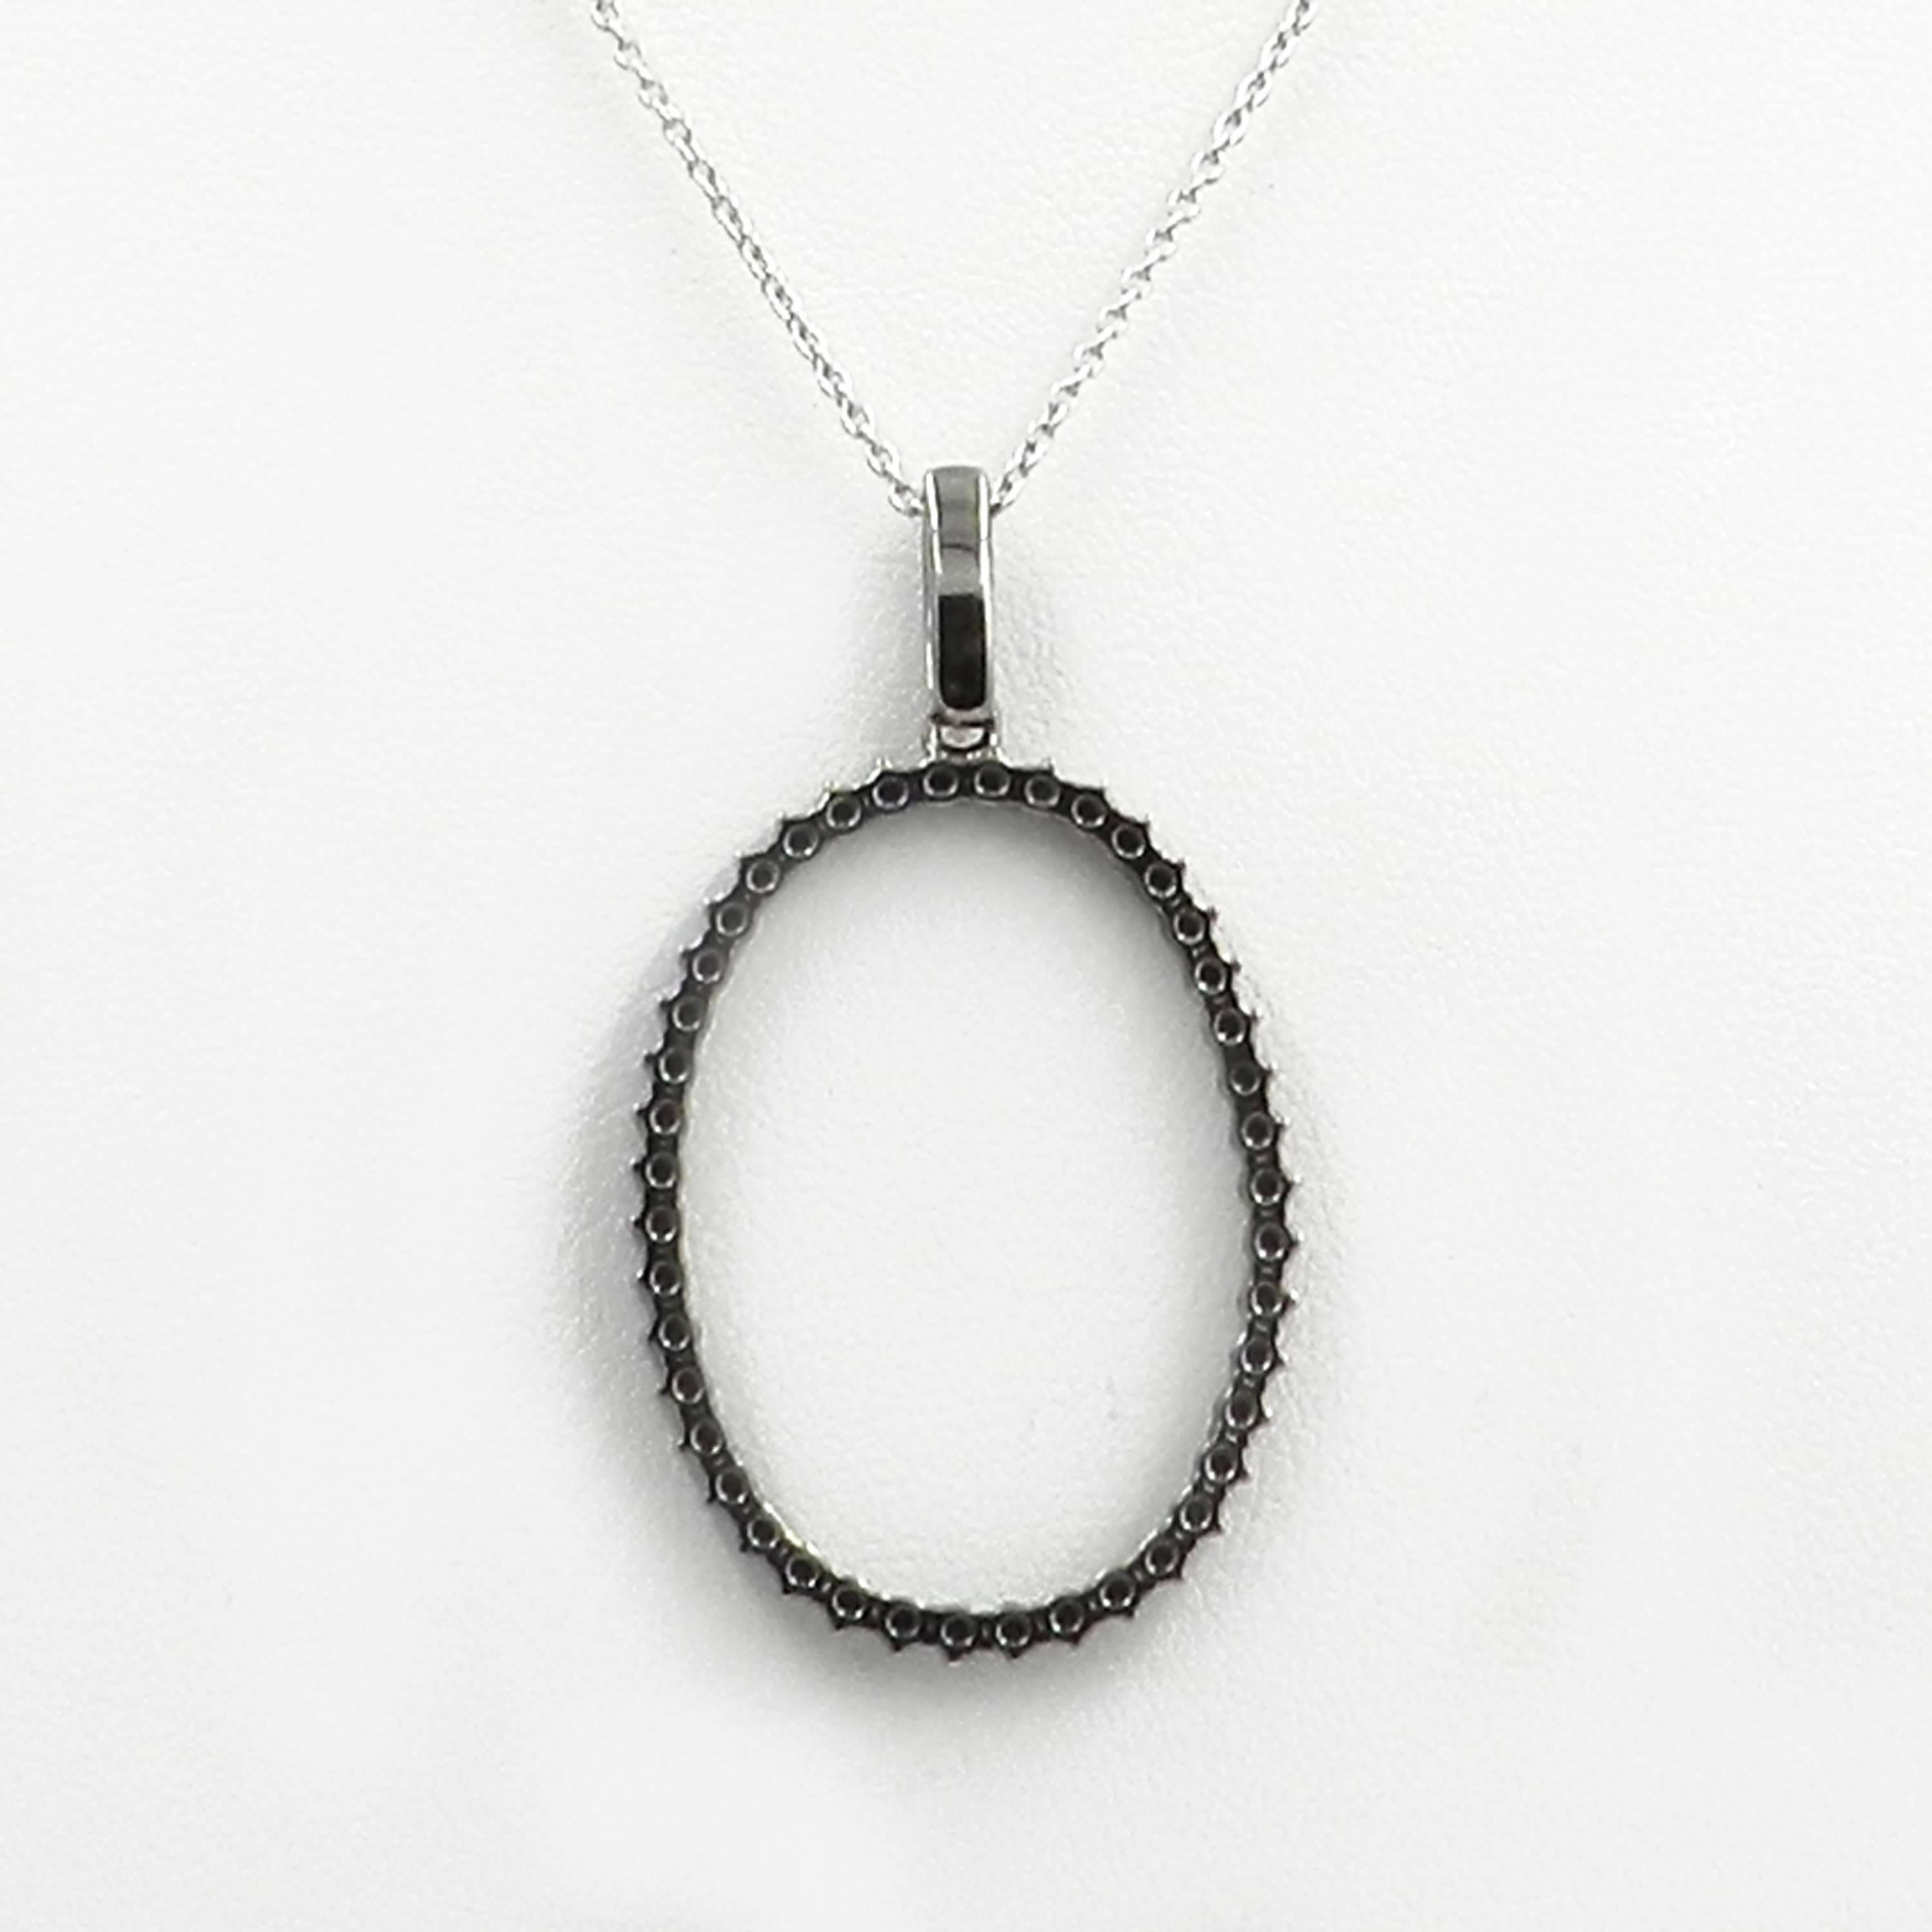 18KT White Gold GARAVELLI NECKLACE with BLACK DIAMONDS 
Oval black diamonds element on a white gold chain with two black diamonds on each side. Chain lenght 46 cm (18 inches)
GOLD gr : 8,68
BLACK DIAMONDS ct : 2,15